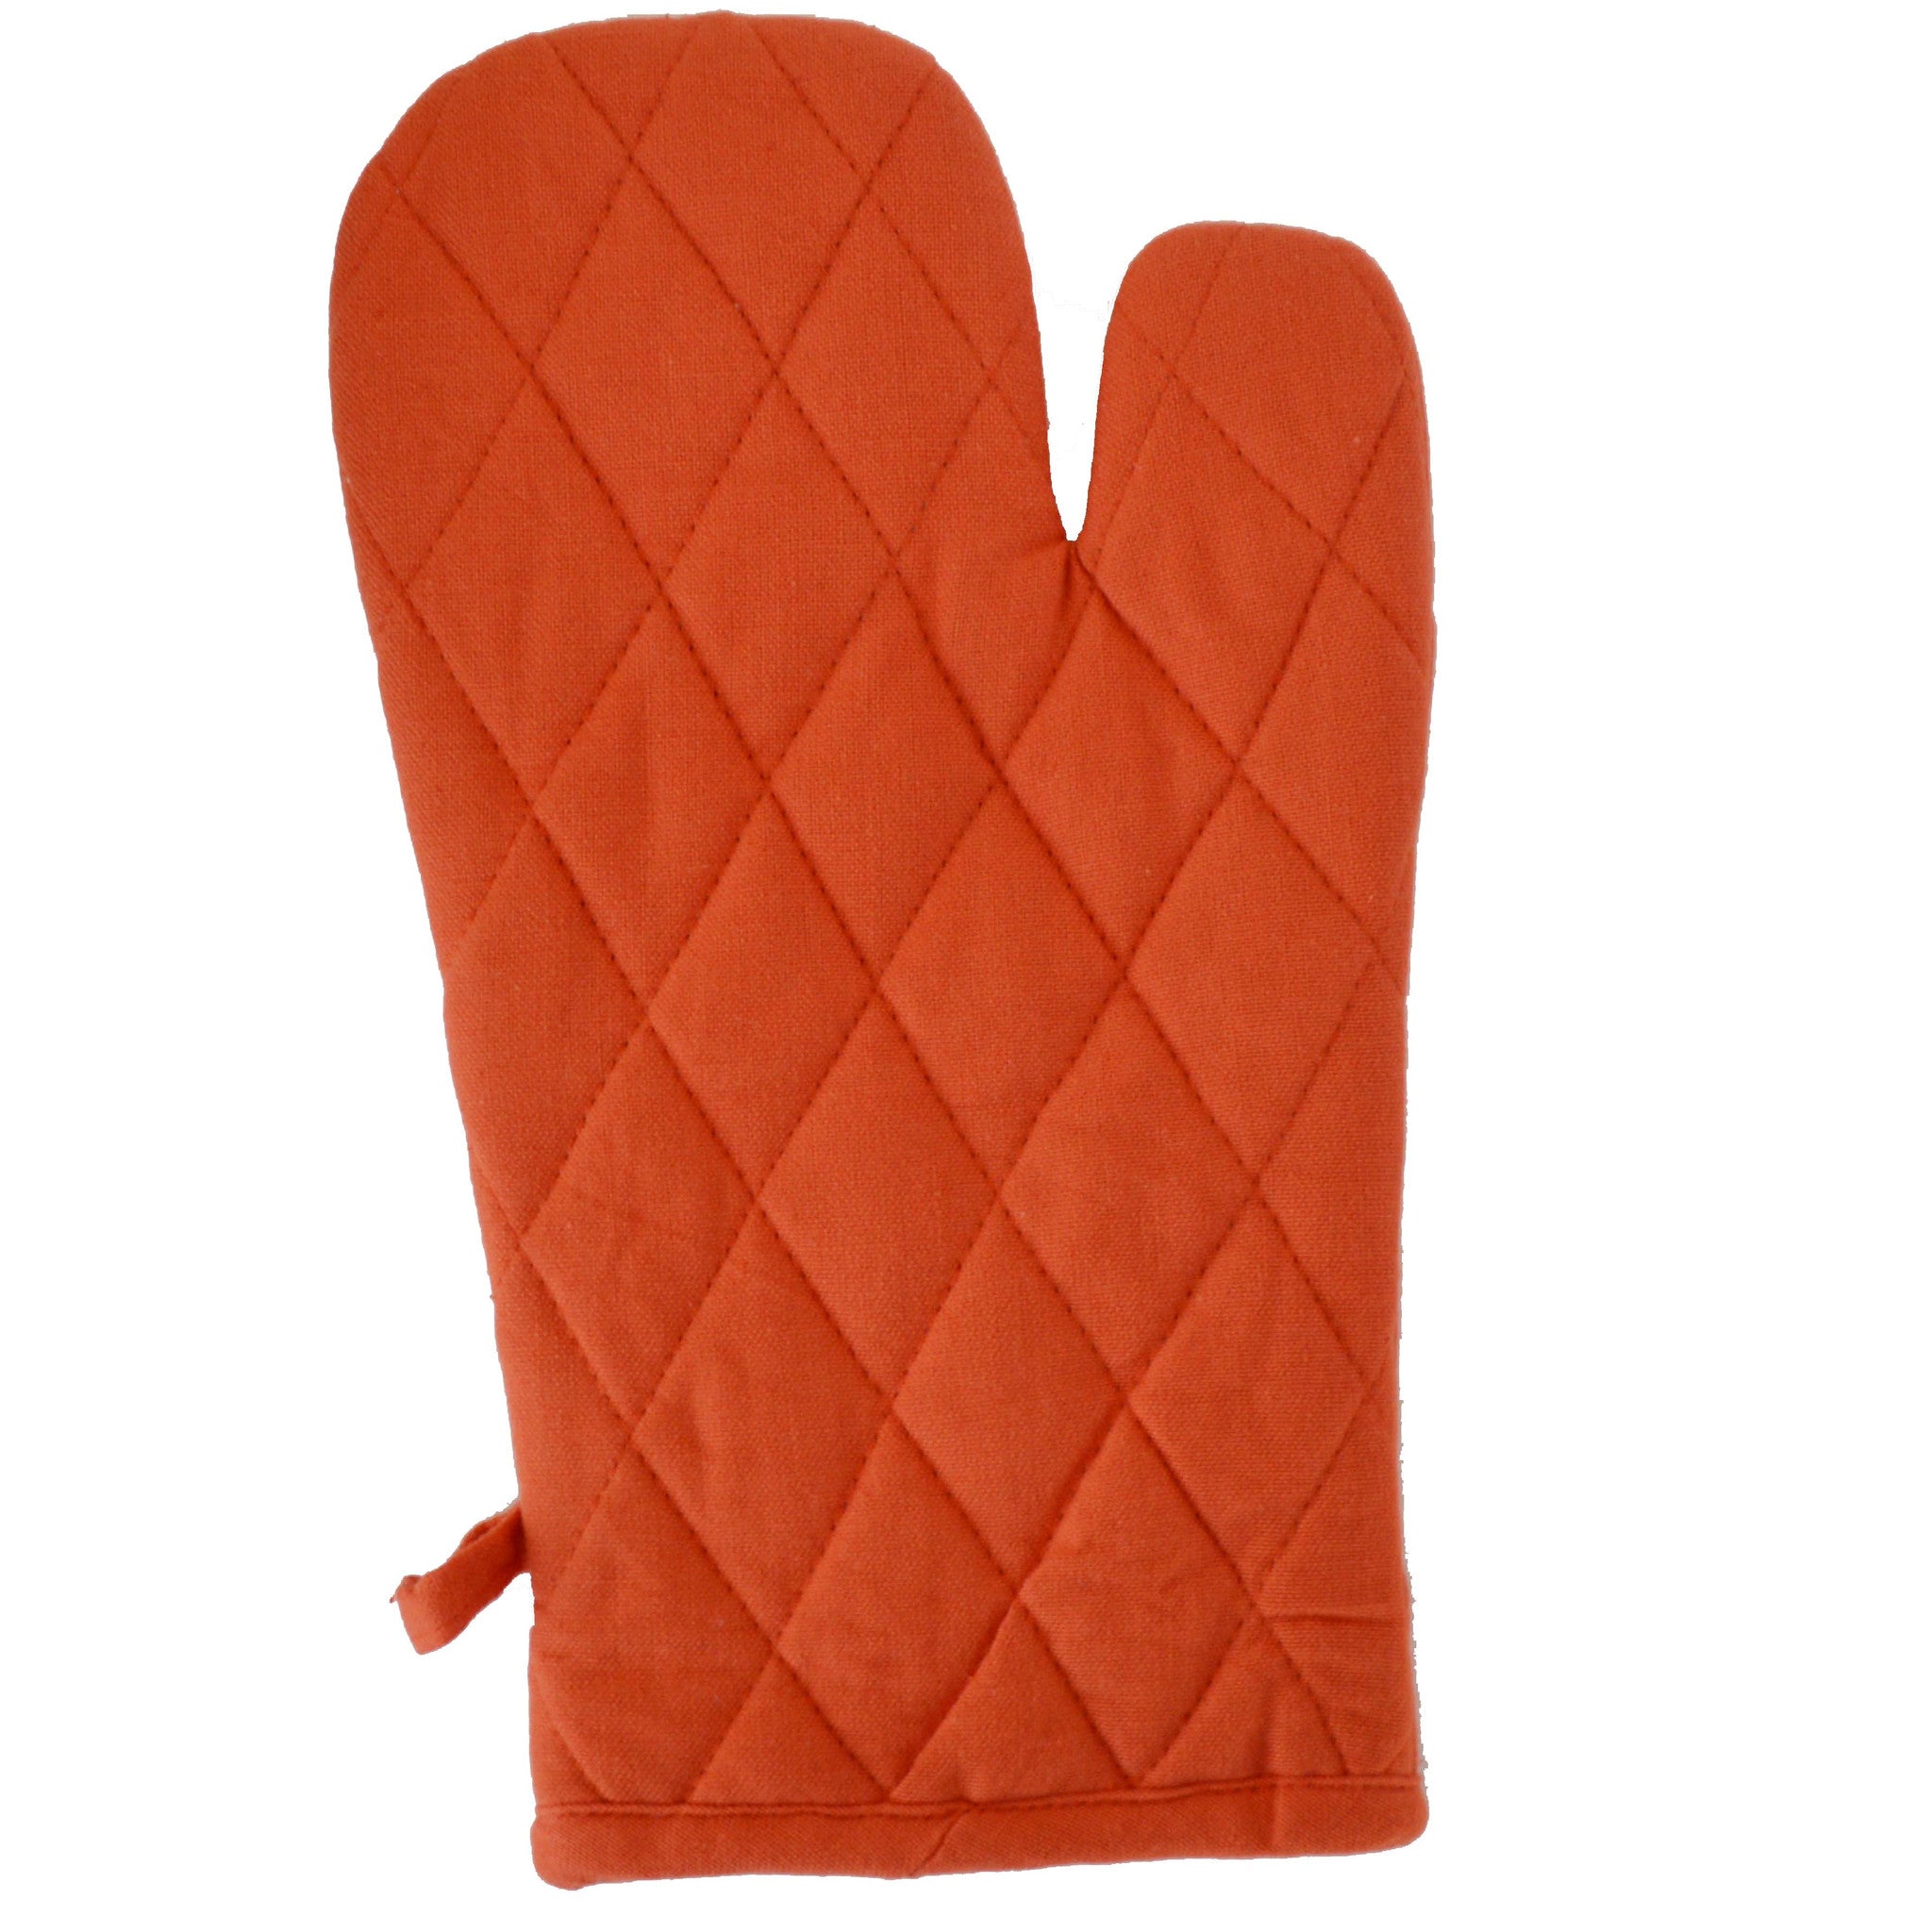 Buy Oven Mitts Set of 2 (Gray/Orange) from Cook'n'Chic®